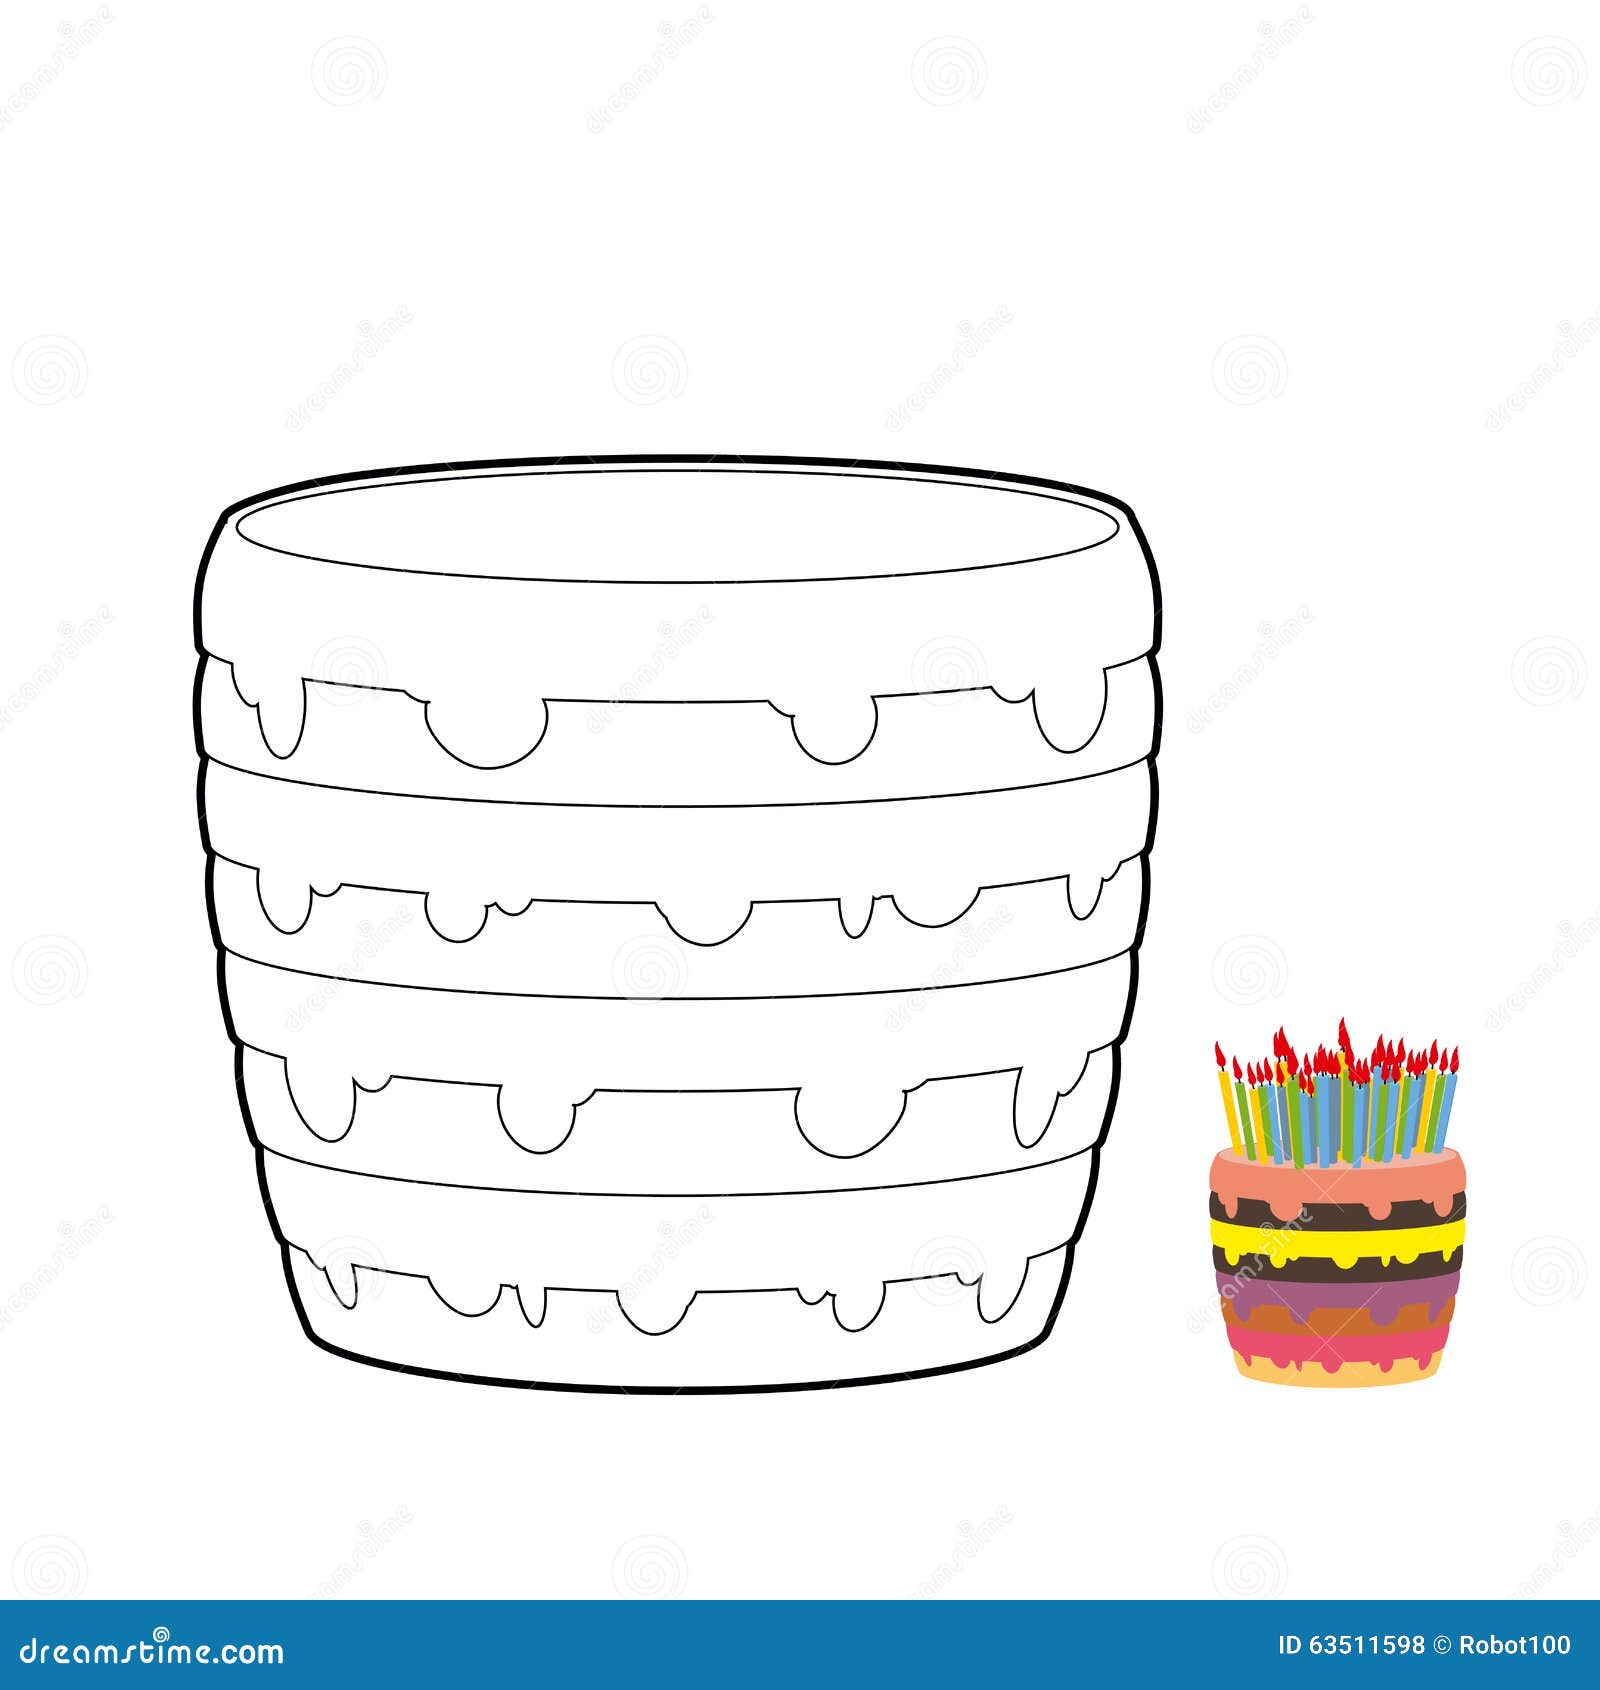 cake coloring pages with congratulations - photo #50